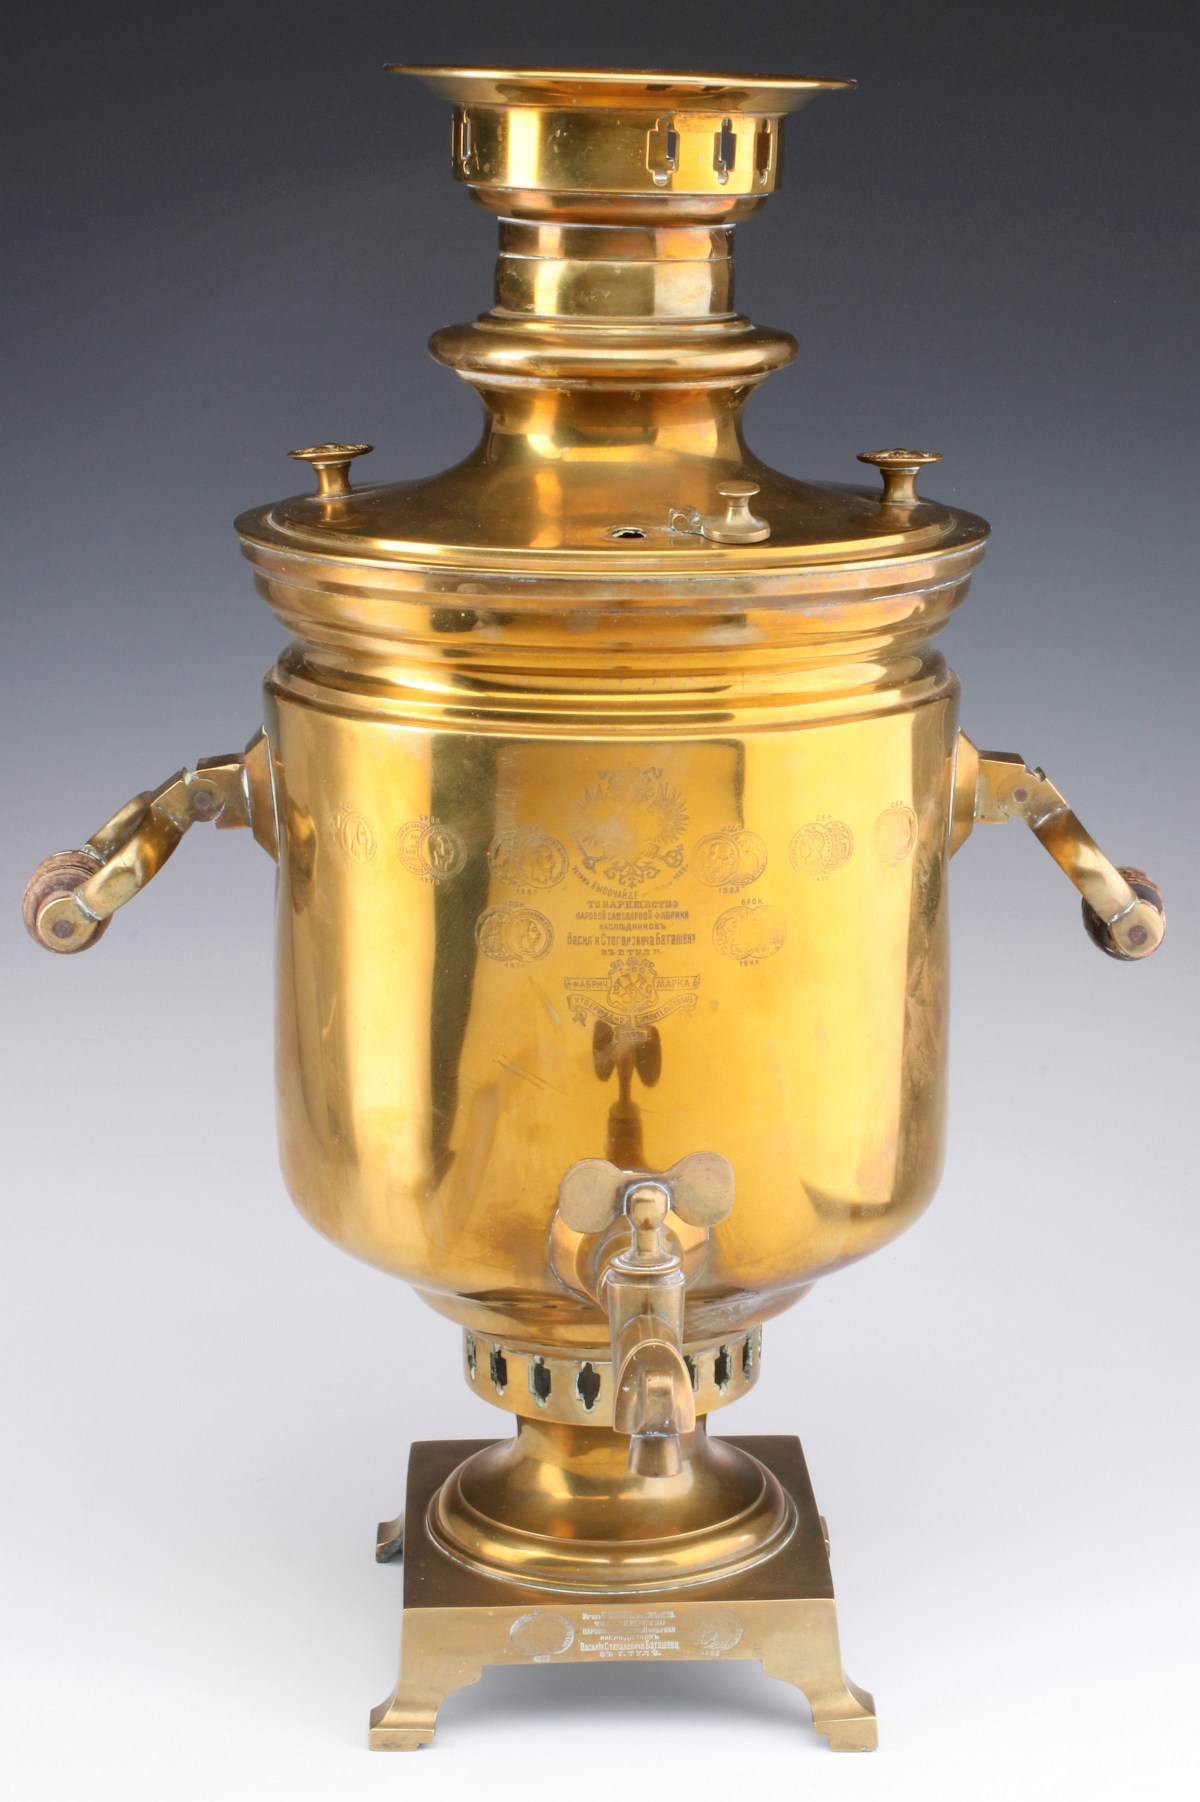 A RUSSIAN BRASS SAMOVAR W/ EXHIBITION AND DESIGN STAMPS